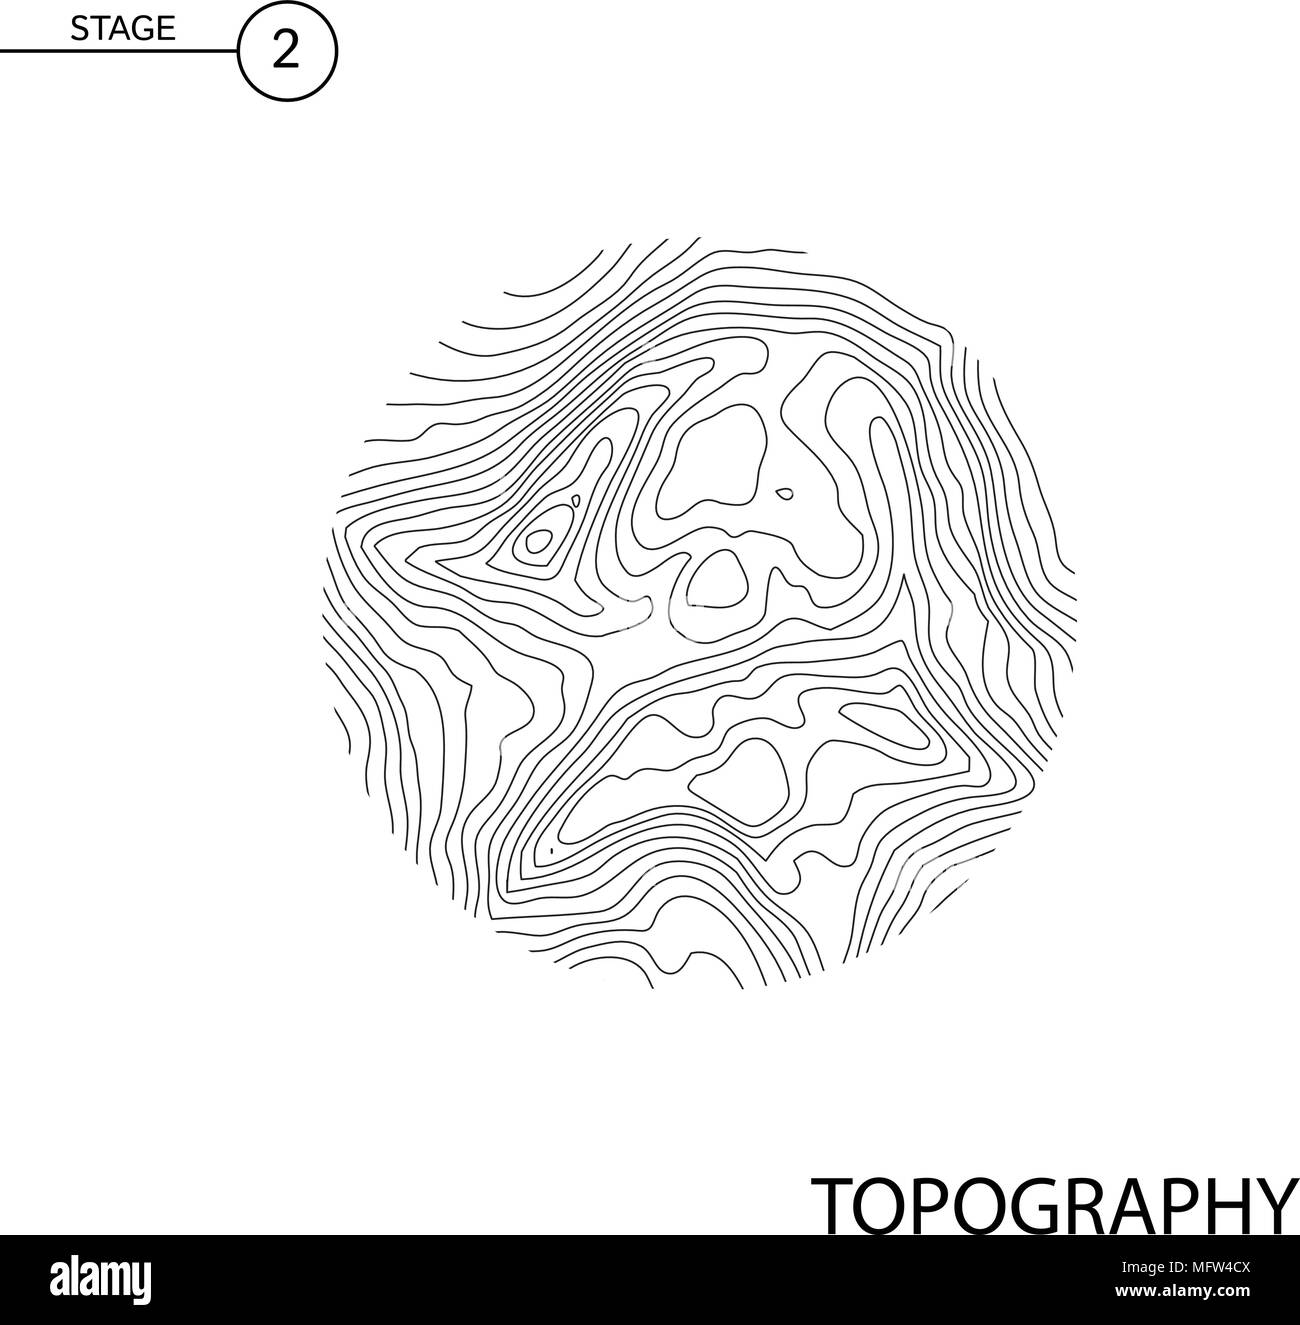 Topographic Map Black and White Stock Photos & Images - Alamy